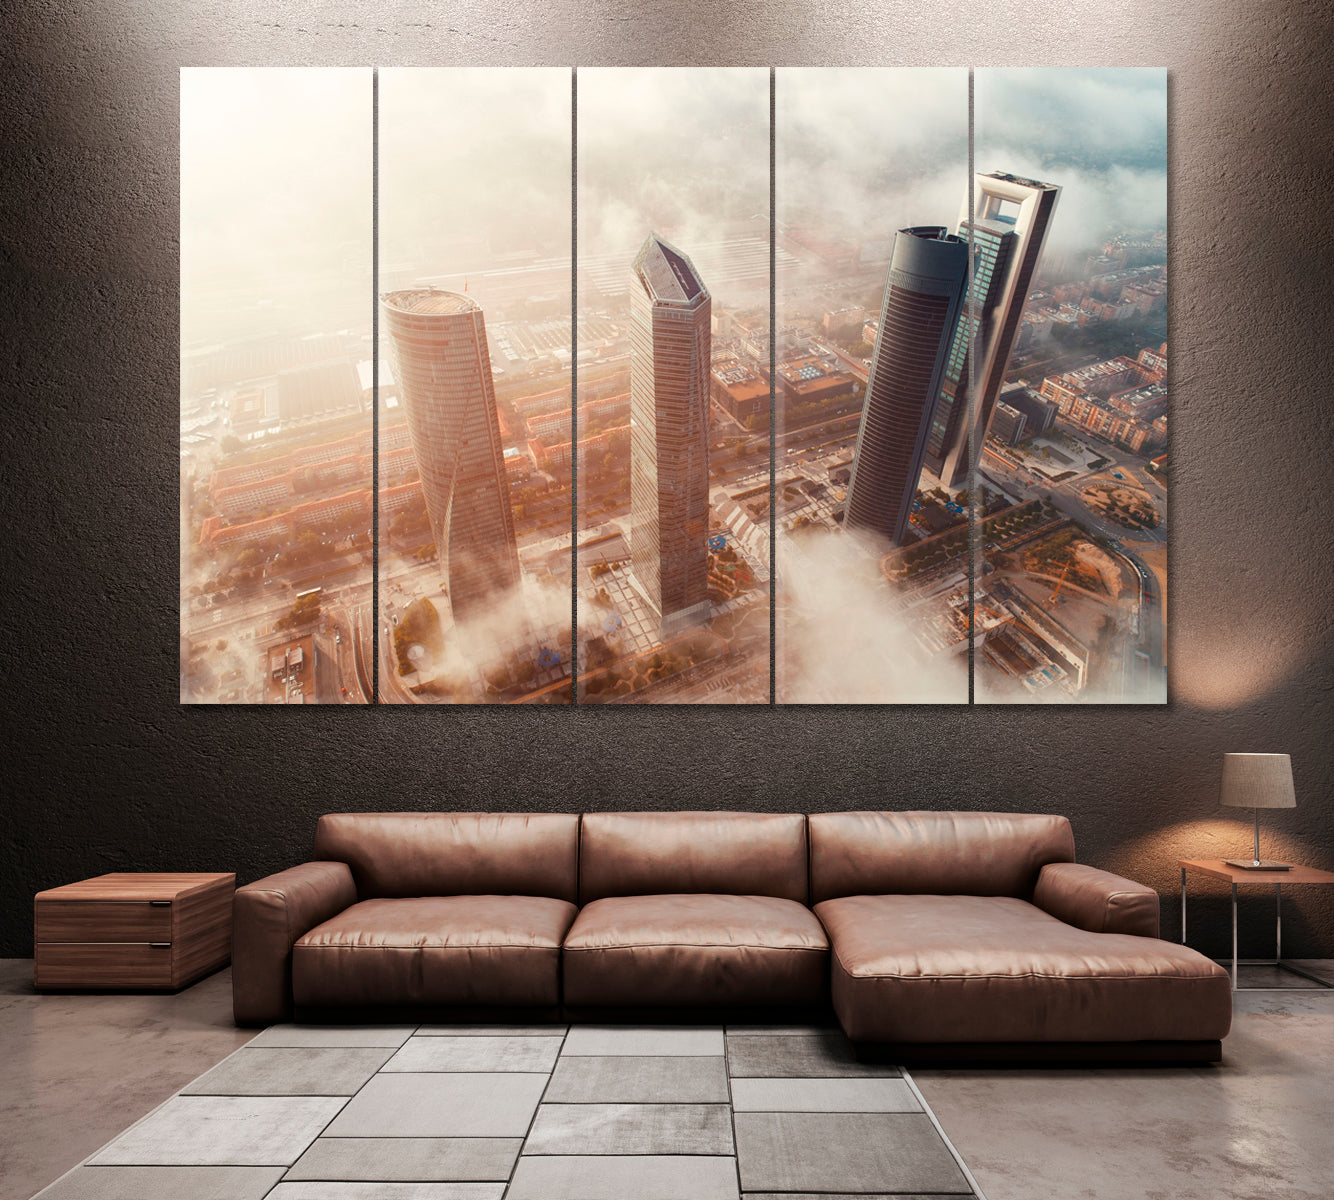 Madrid Financial Business District Spain Canvas Print ArtLexy 5 Panels 36"x24" inches 